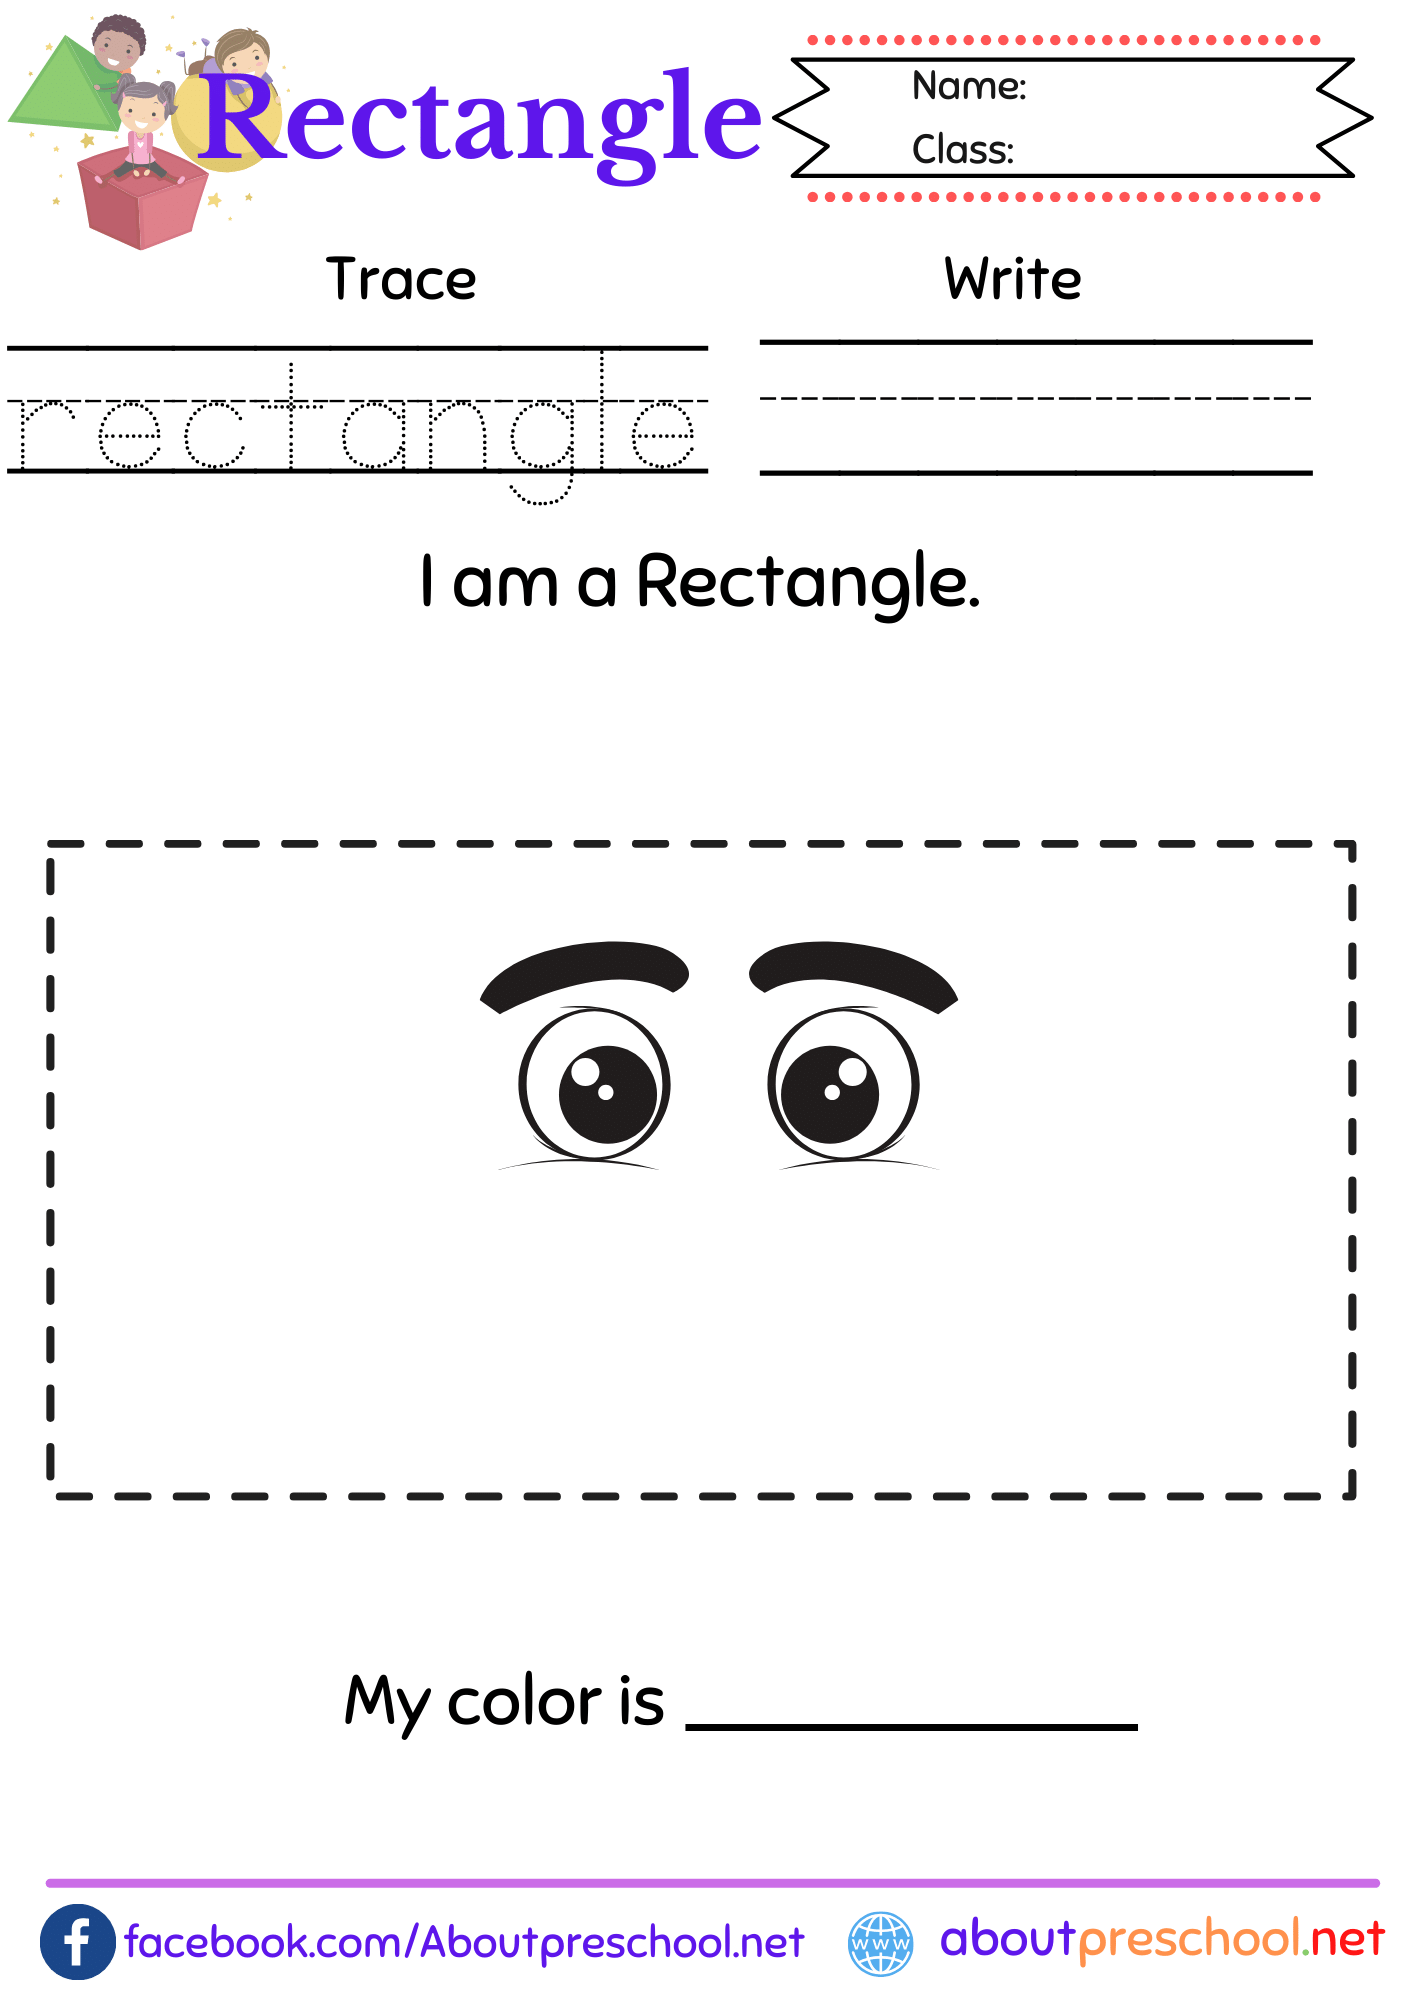 Free Trace and Color the rectangle worksheet